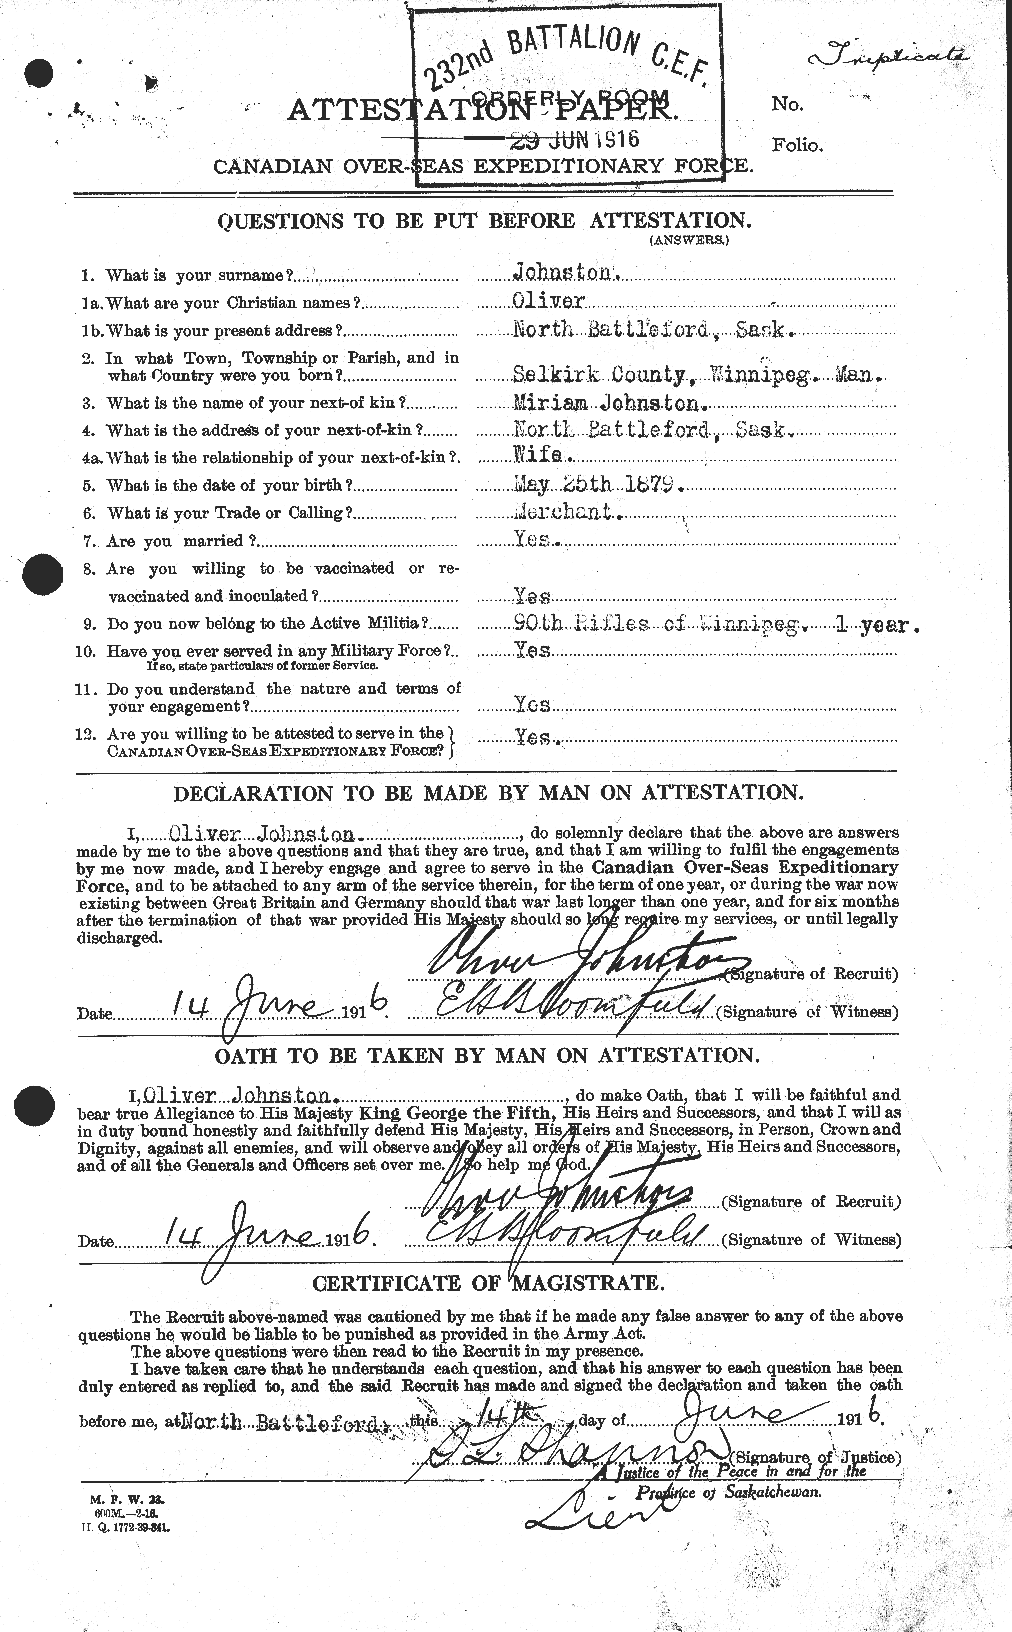 Personnel Records of the First World War - CEF 423011a